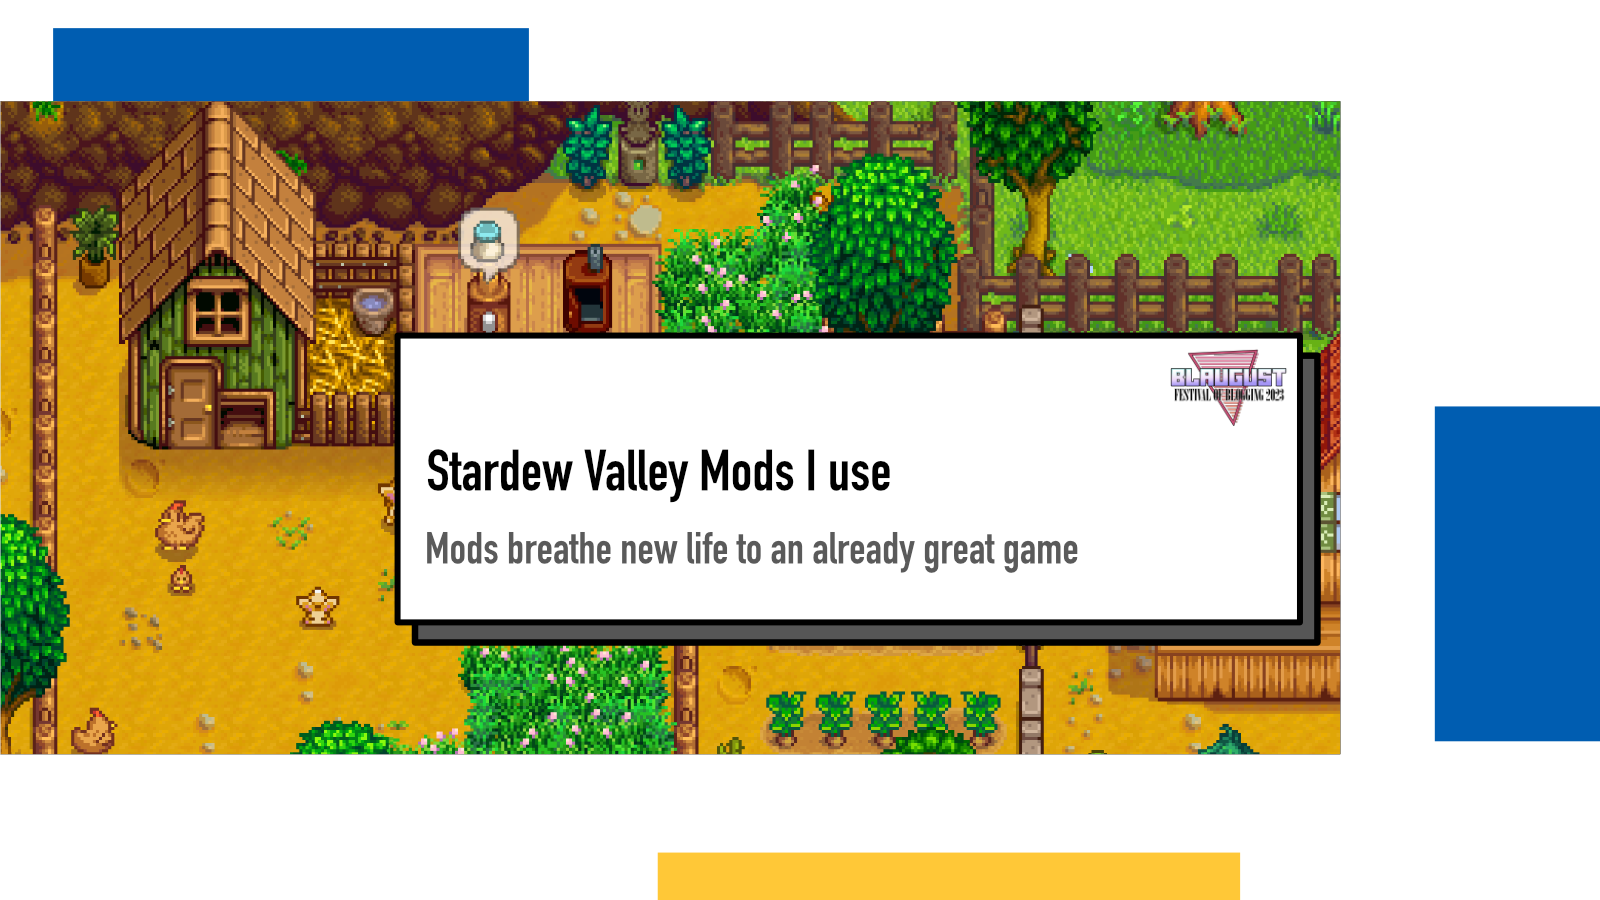 Stardew Valley on Mac: How to Play & Benchmarks